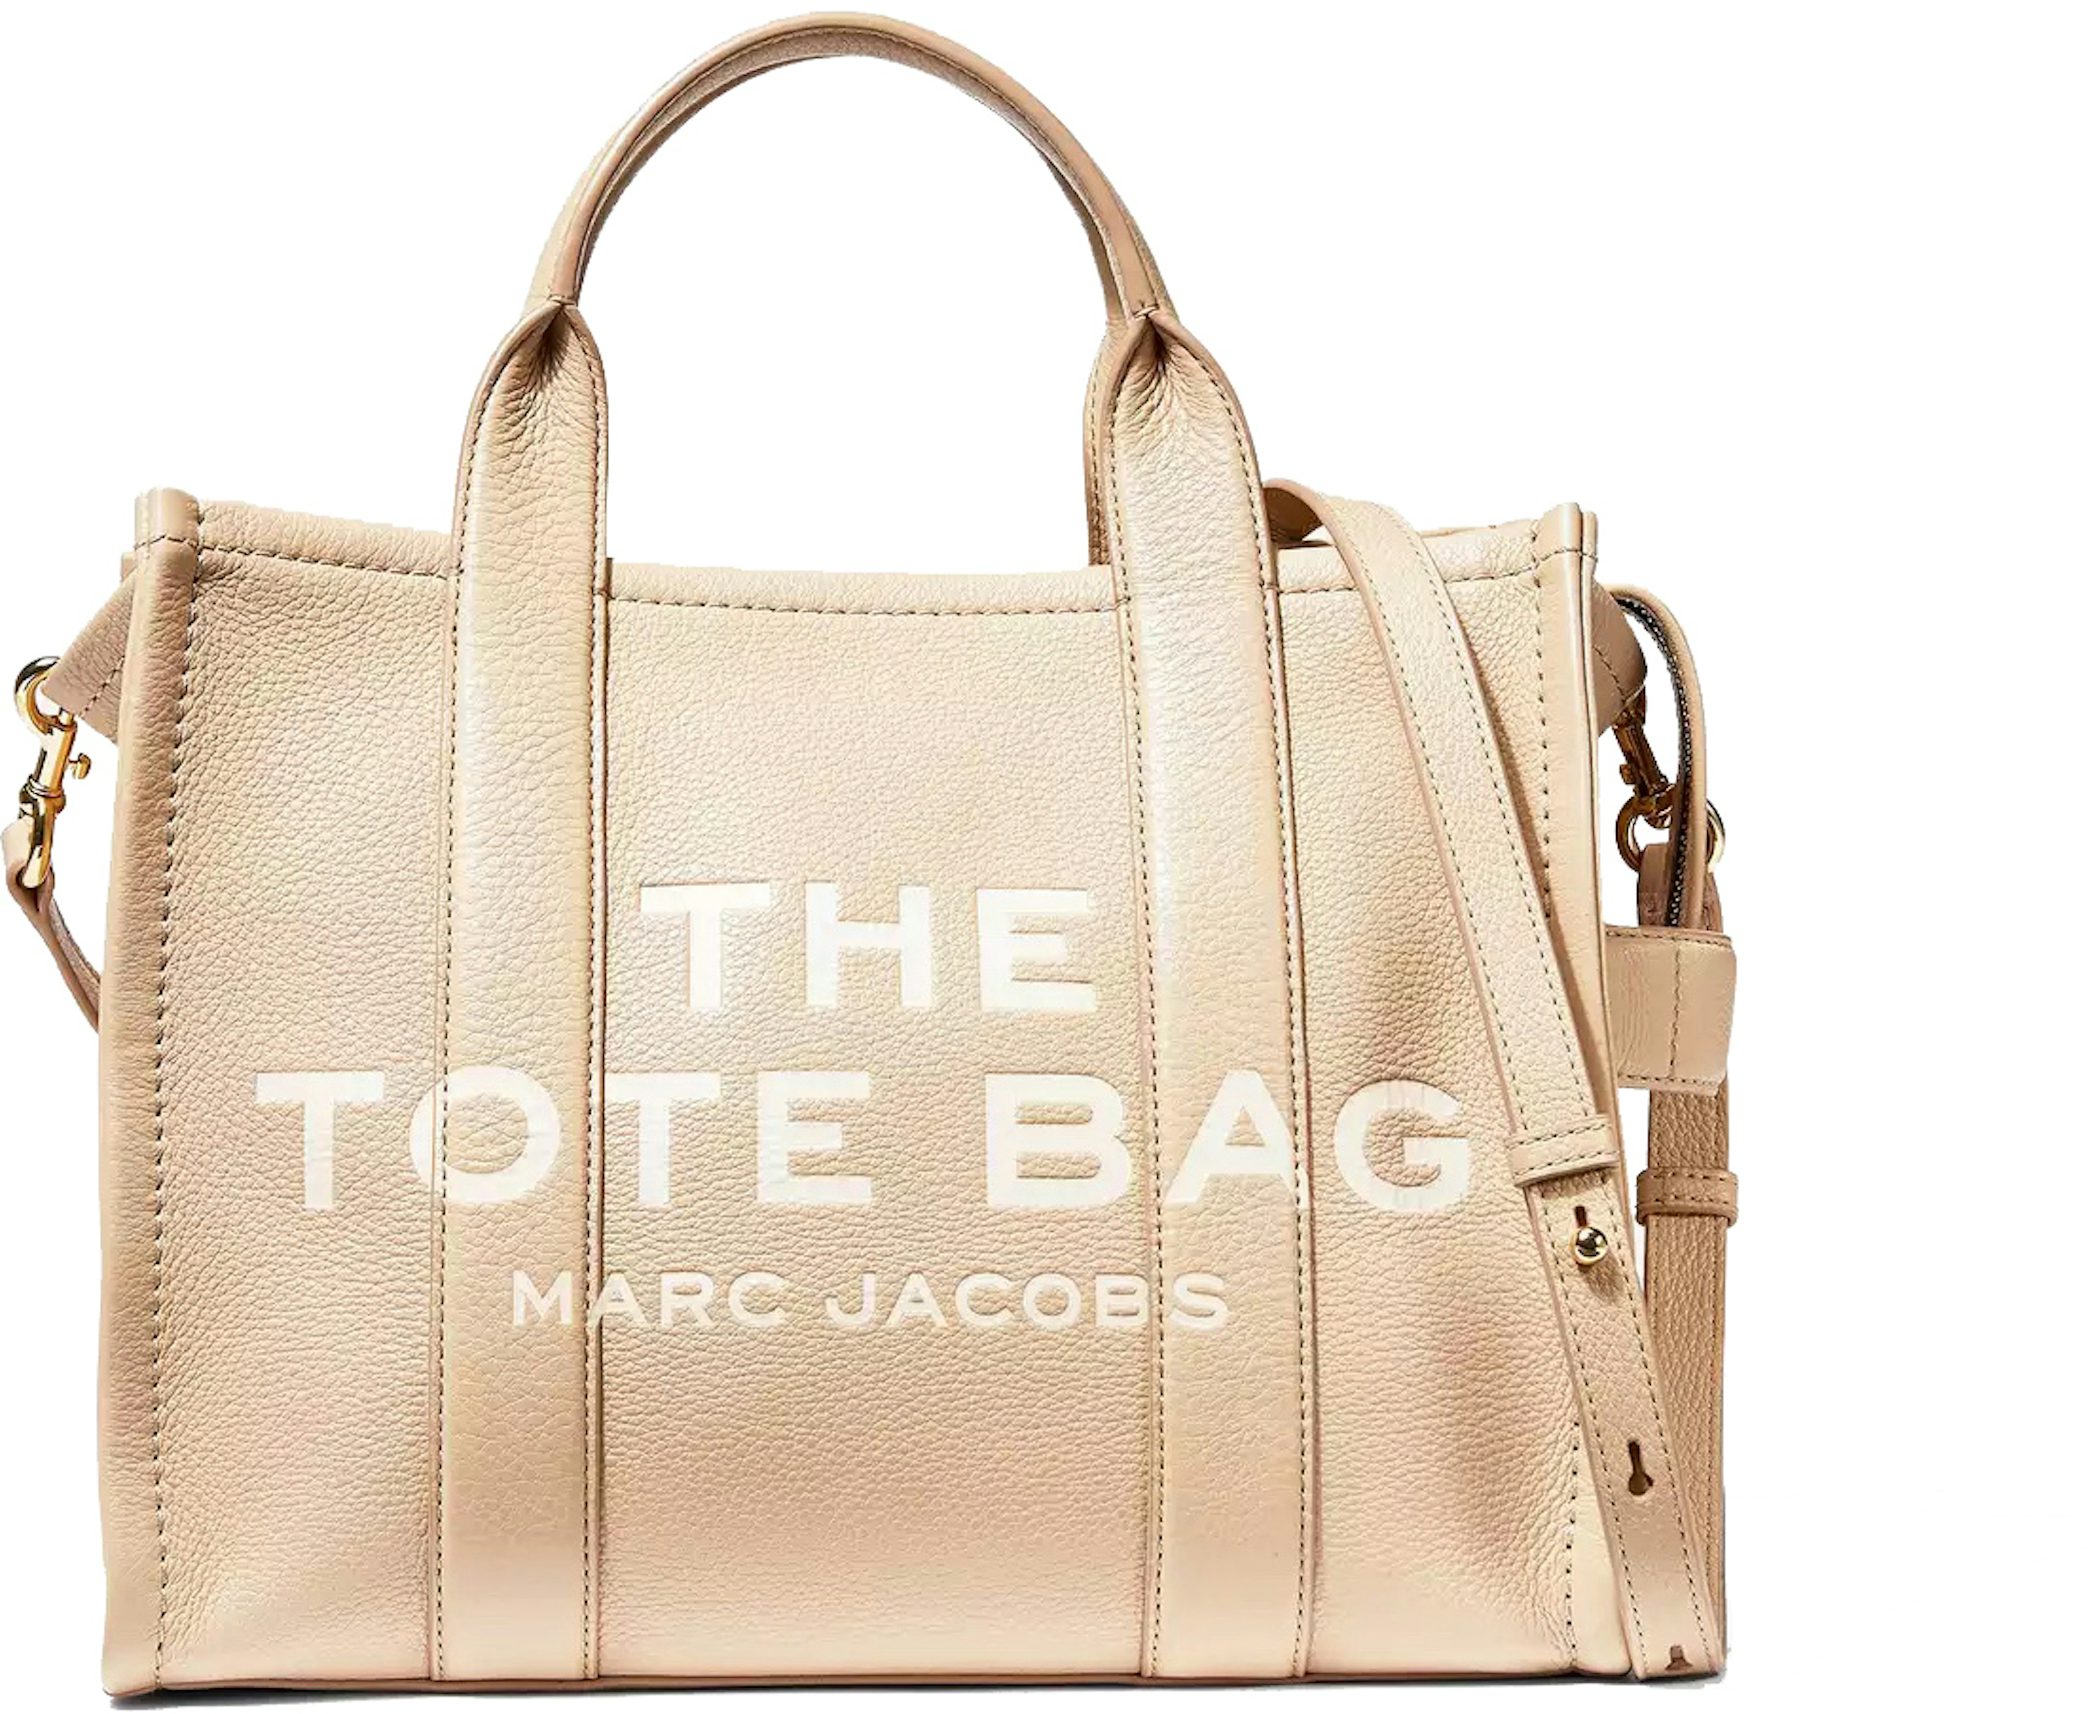 Marc Jacobs The Small Leather Tote Bag - Cement